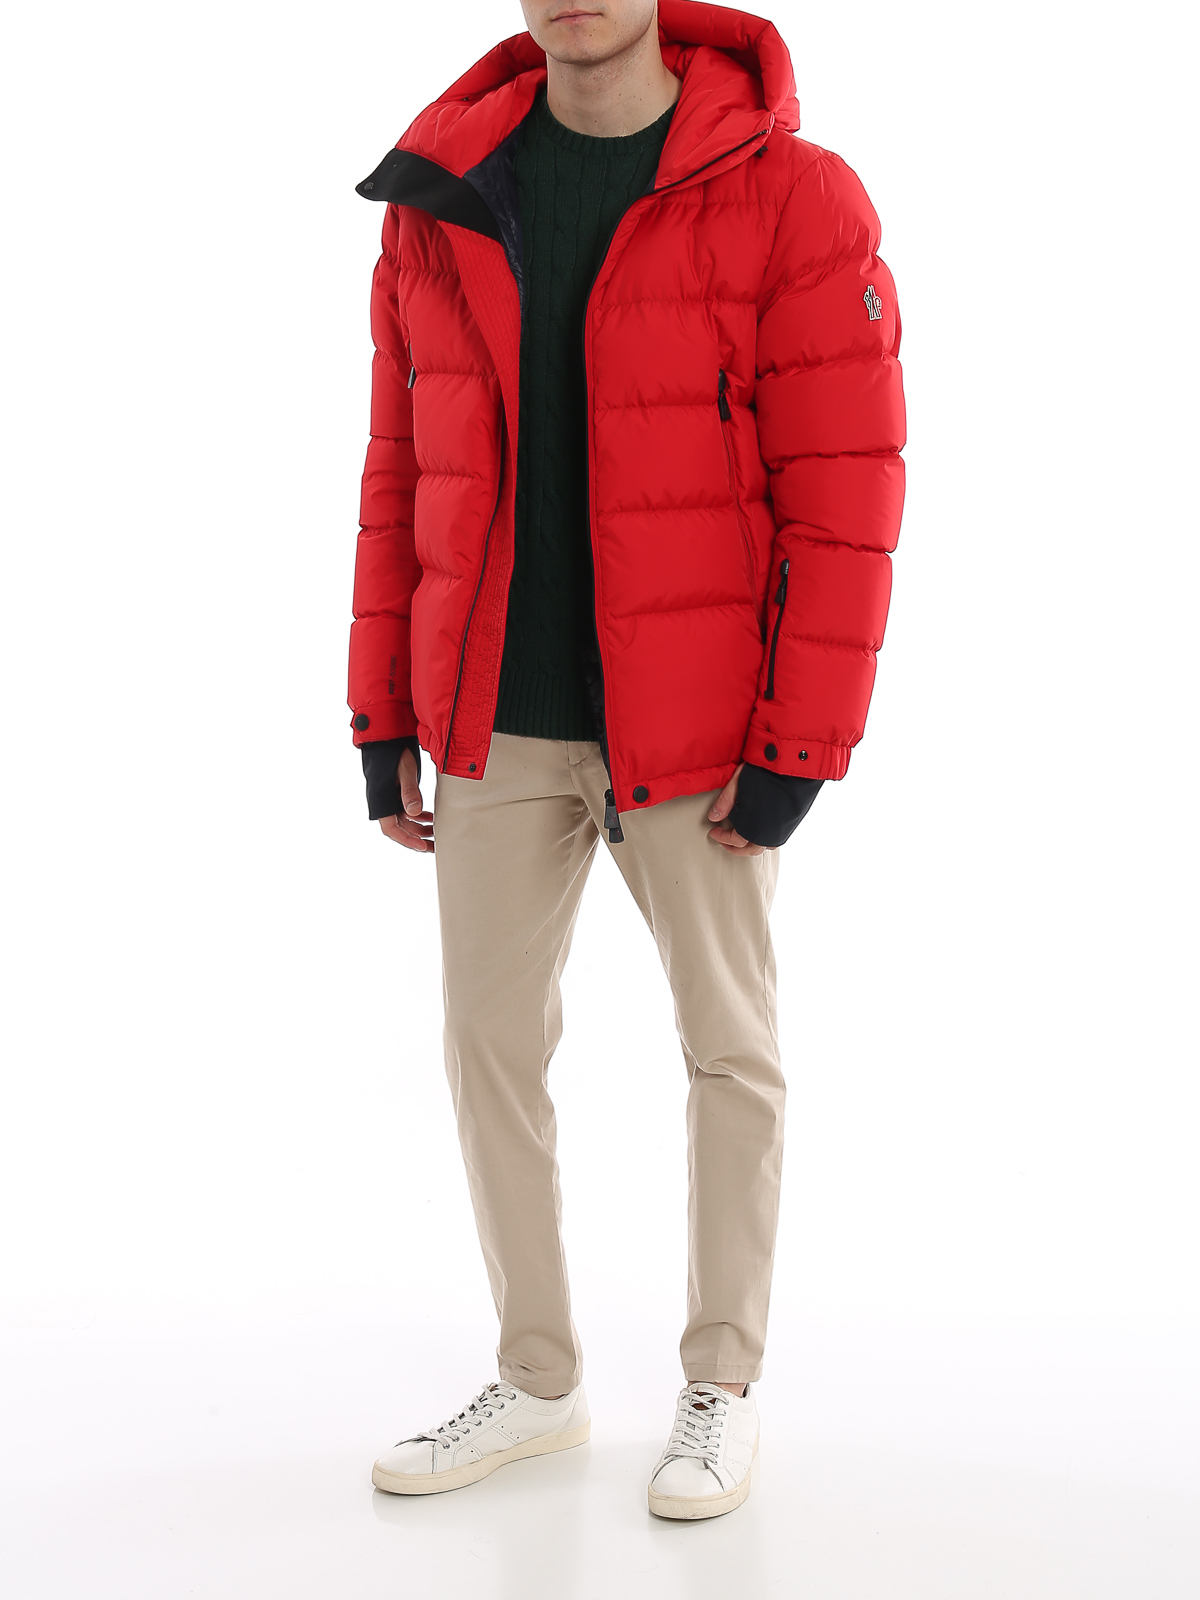 Moncler Grenoble - Isorno red puffer 